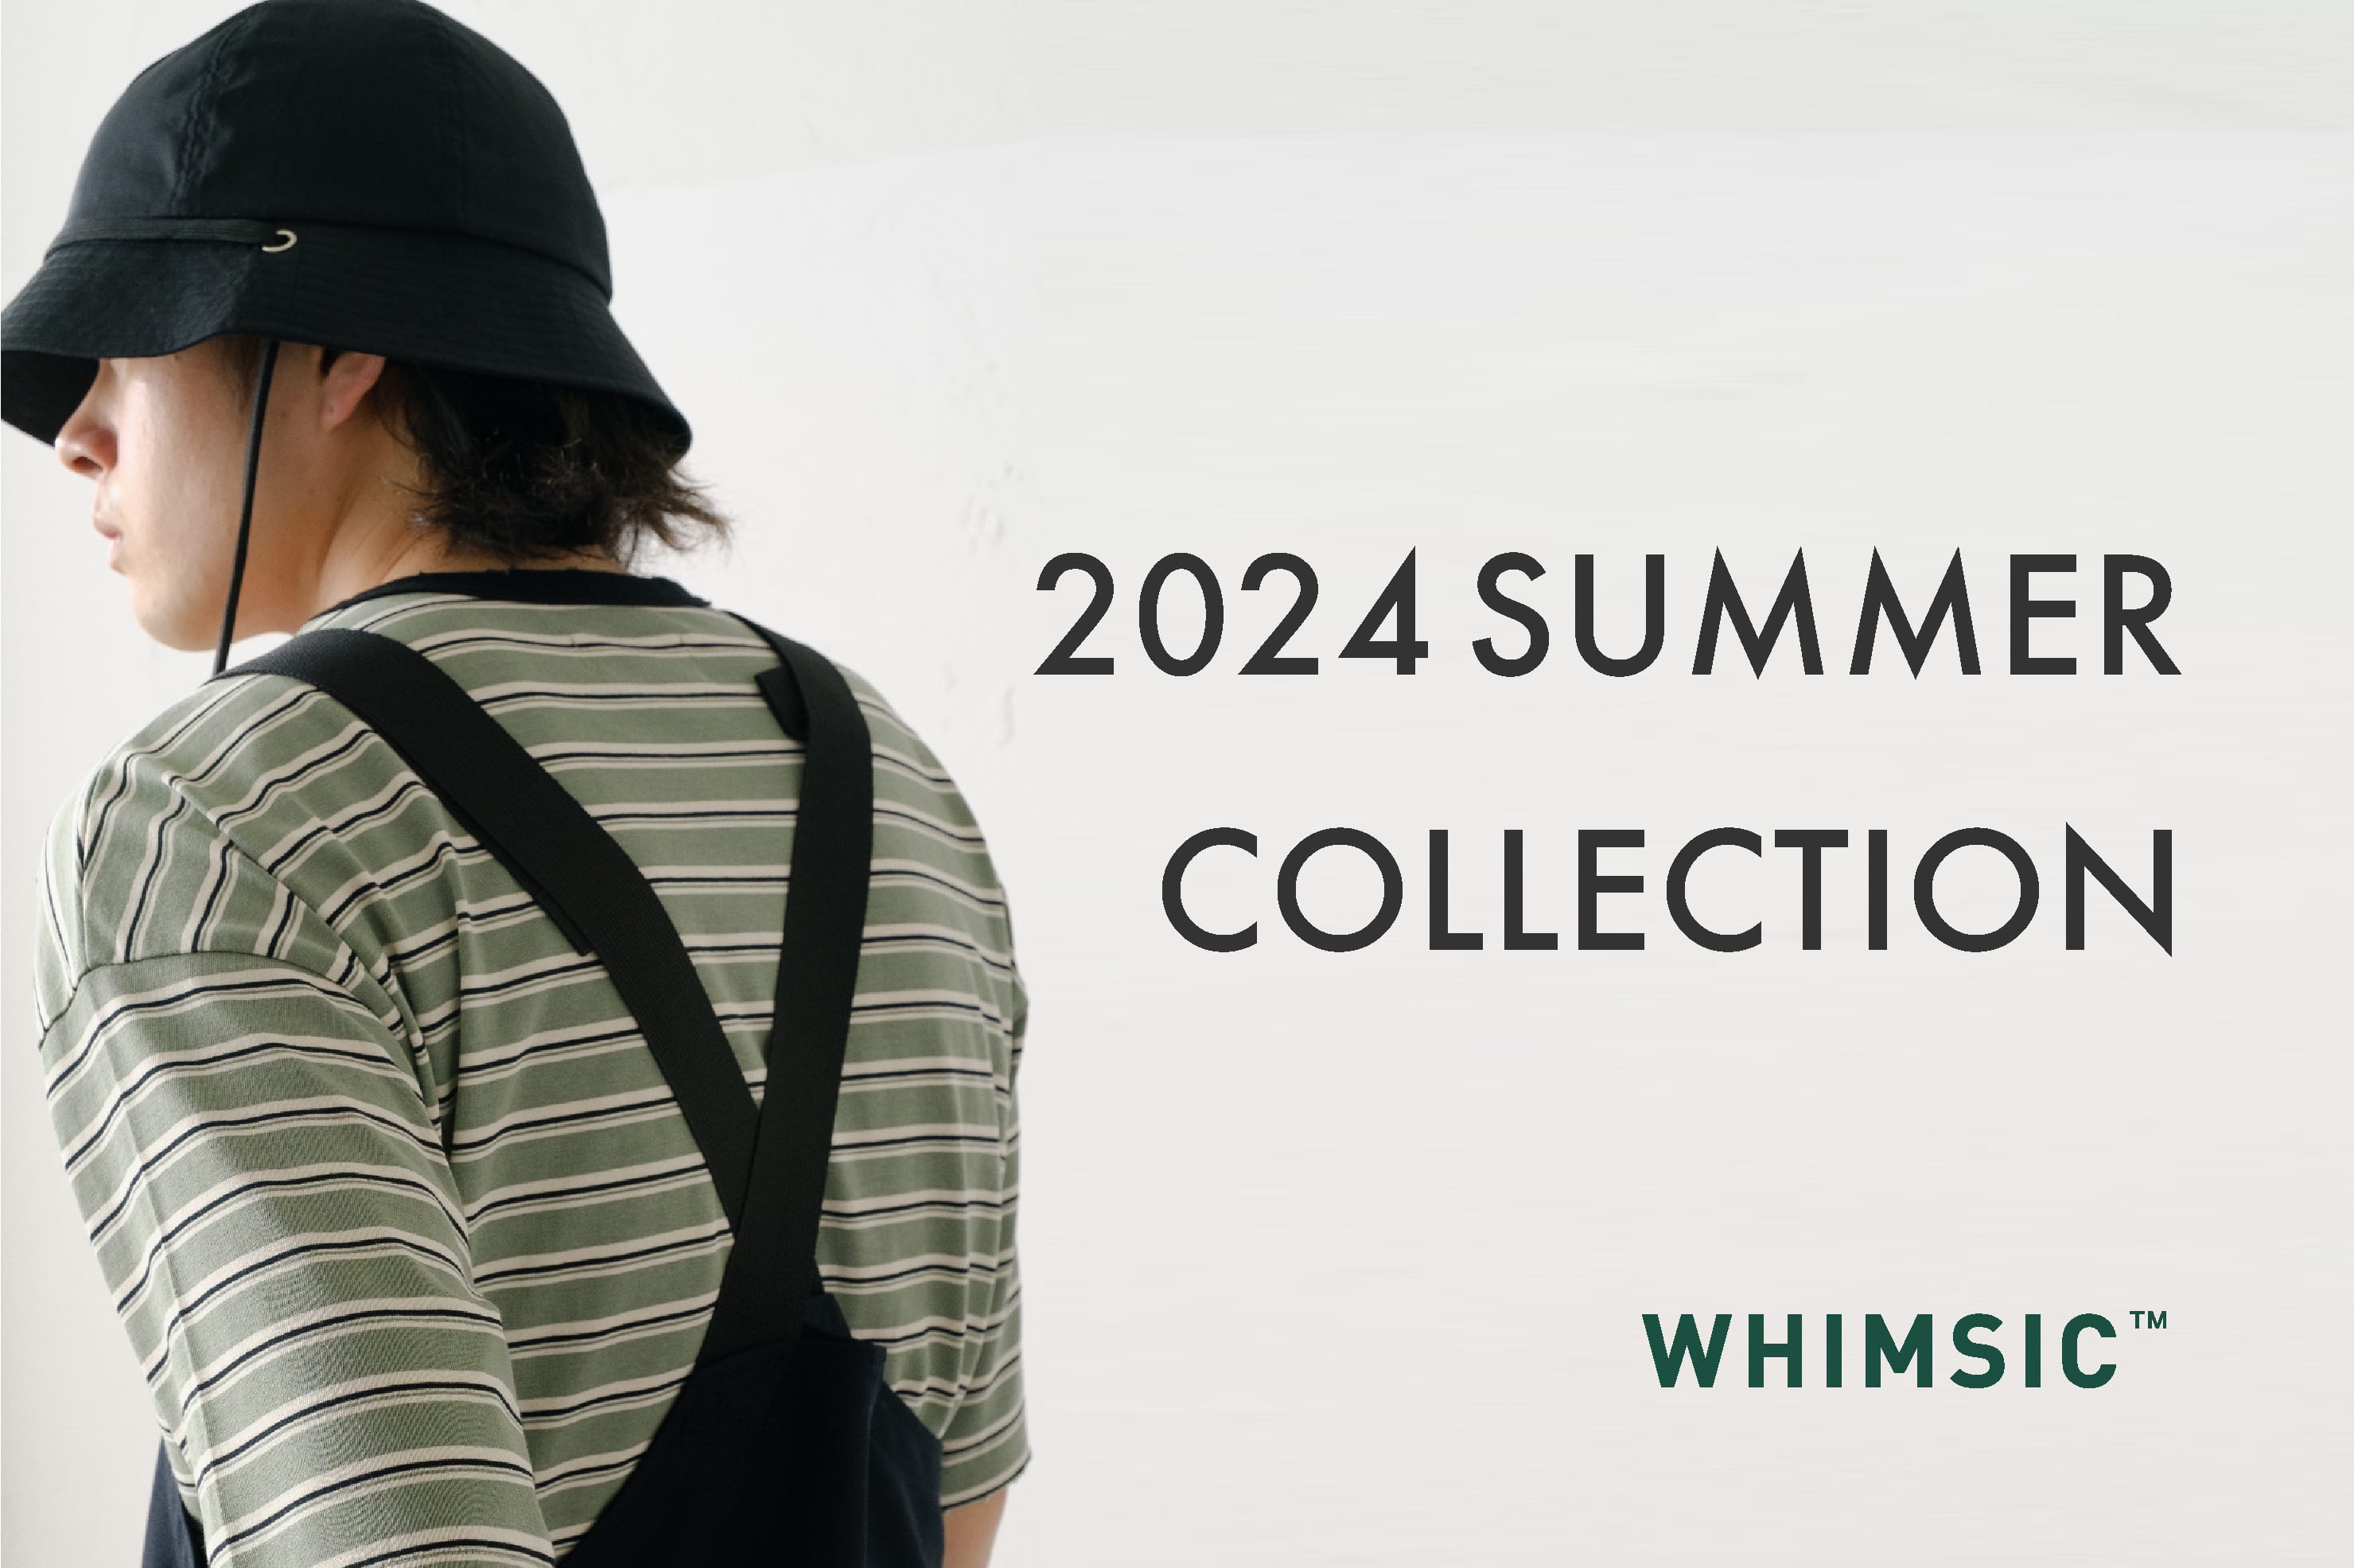 Kastane 【WHIMSIC】2024 SUMMER COLLECTION vol.1